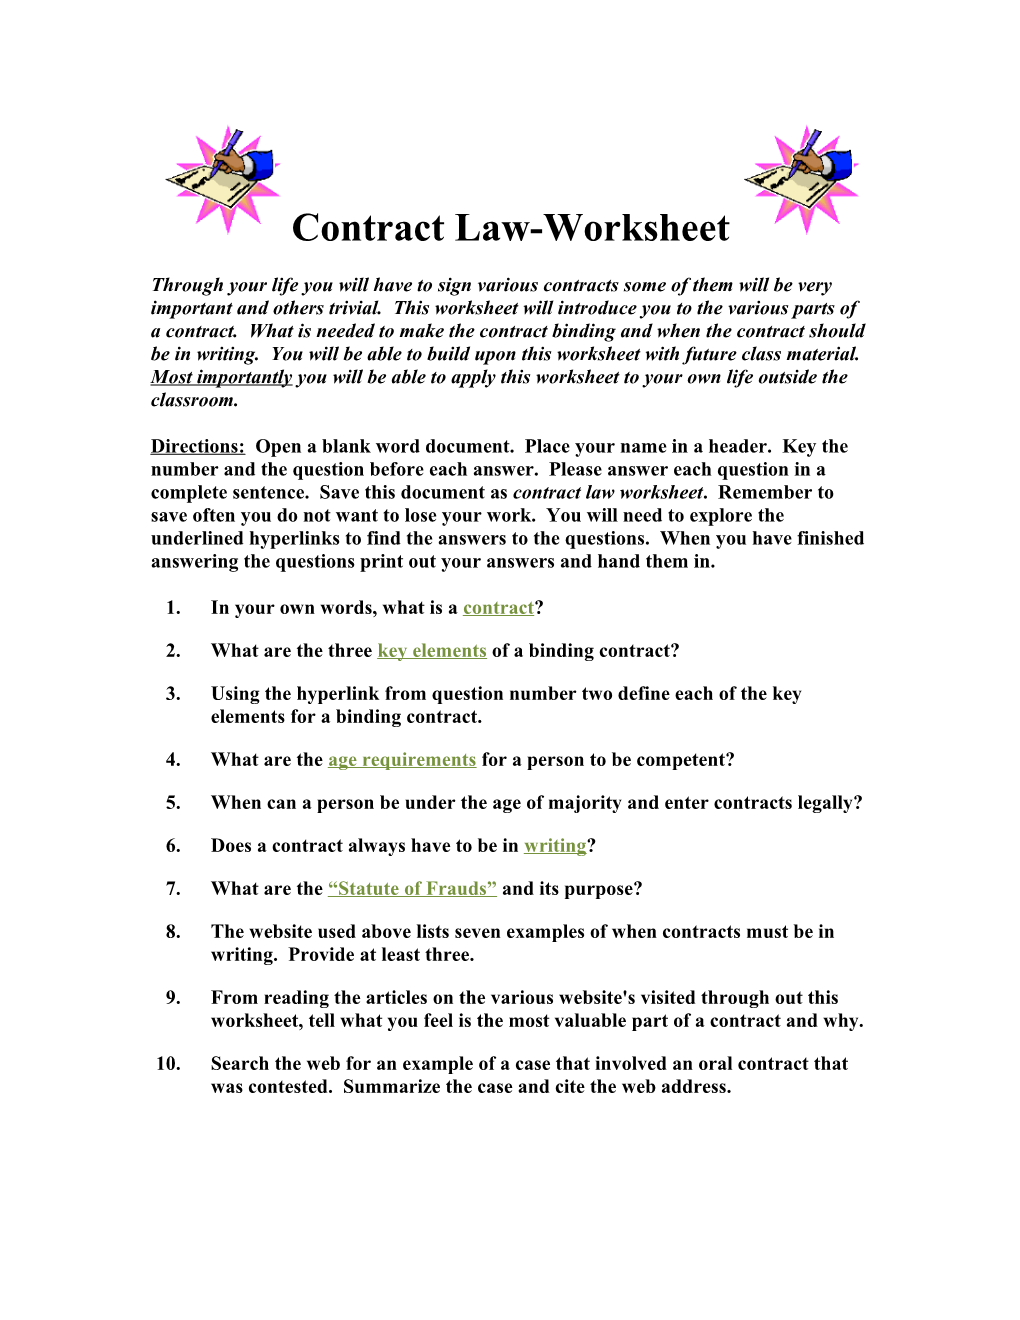 Contract Law-Worksheet